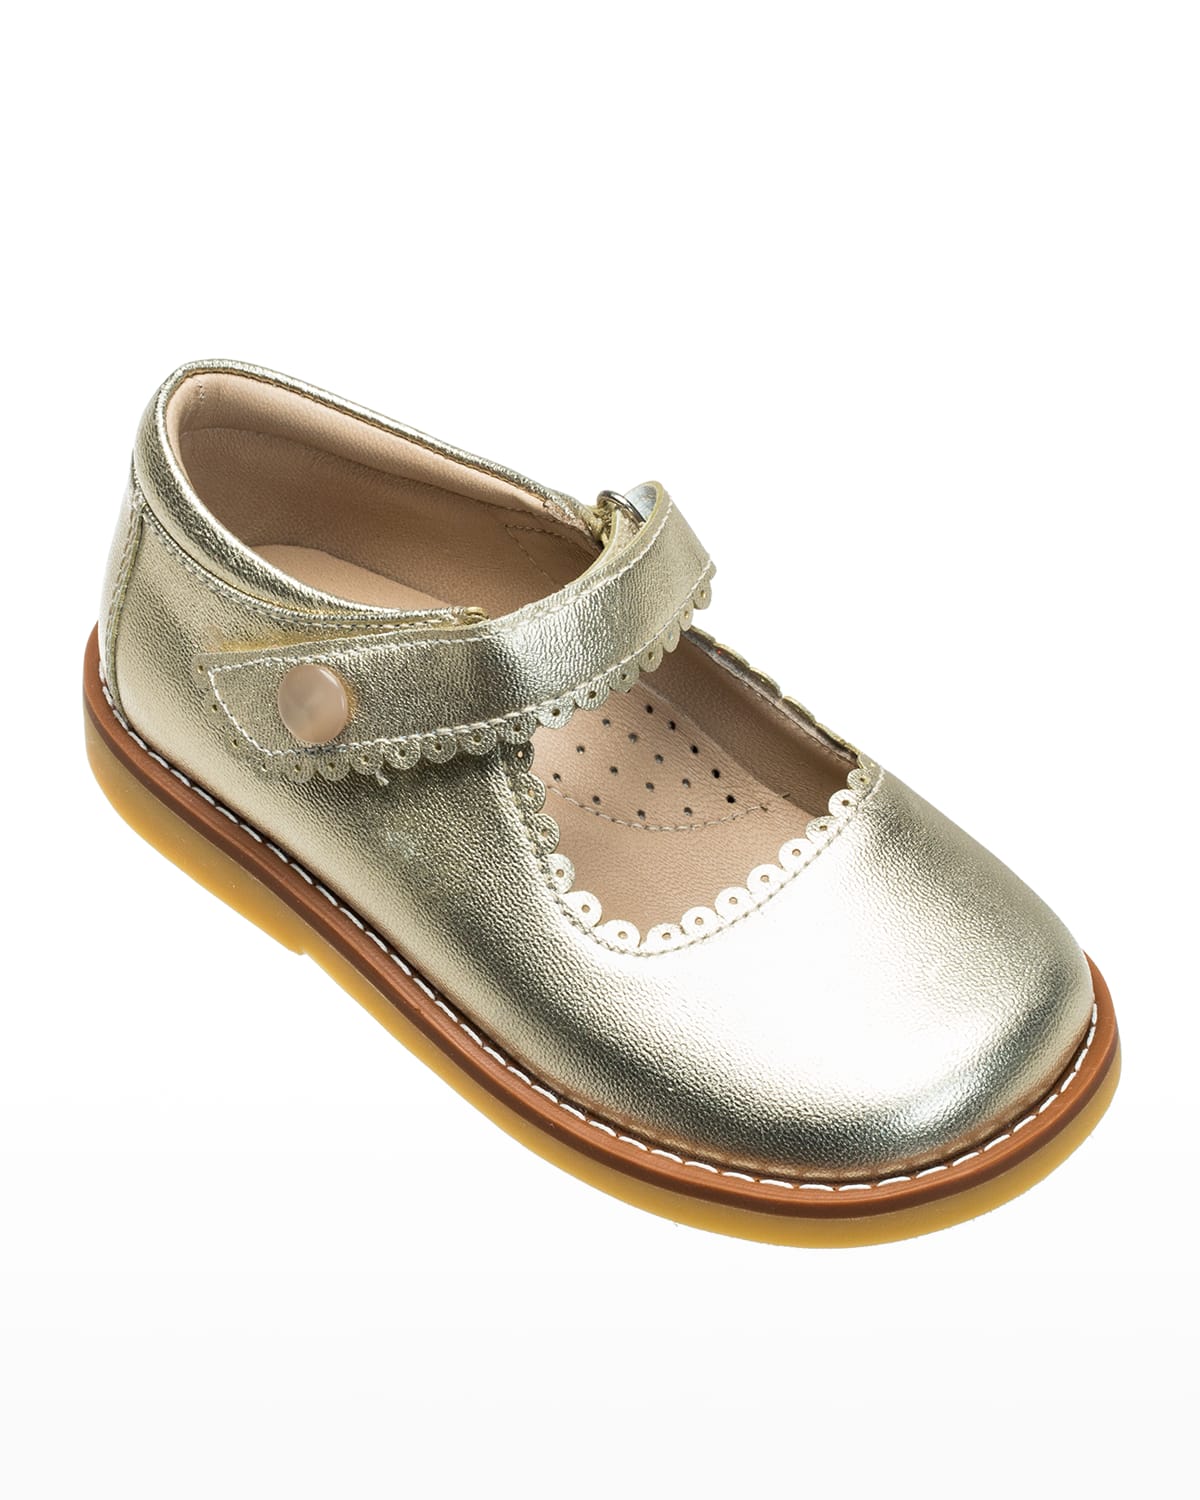 Elephantito Girl's Scalloped Leather Mary Jane, Toddler/kids In Gold